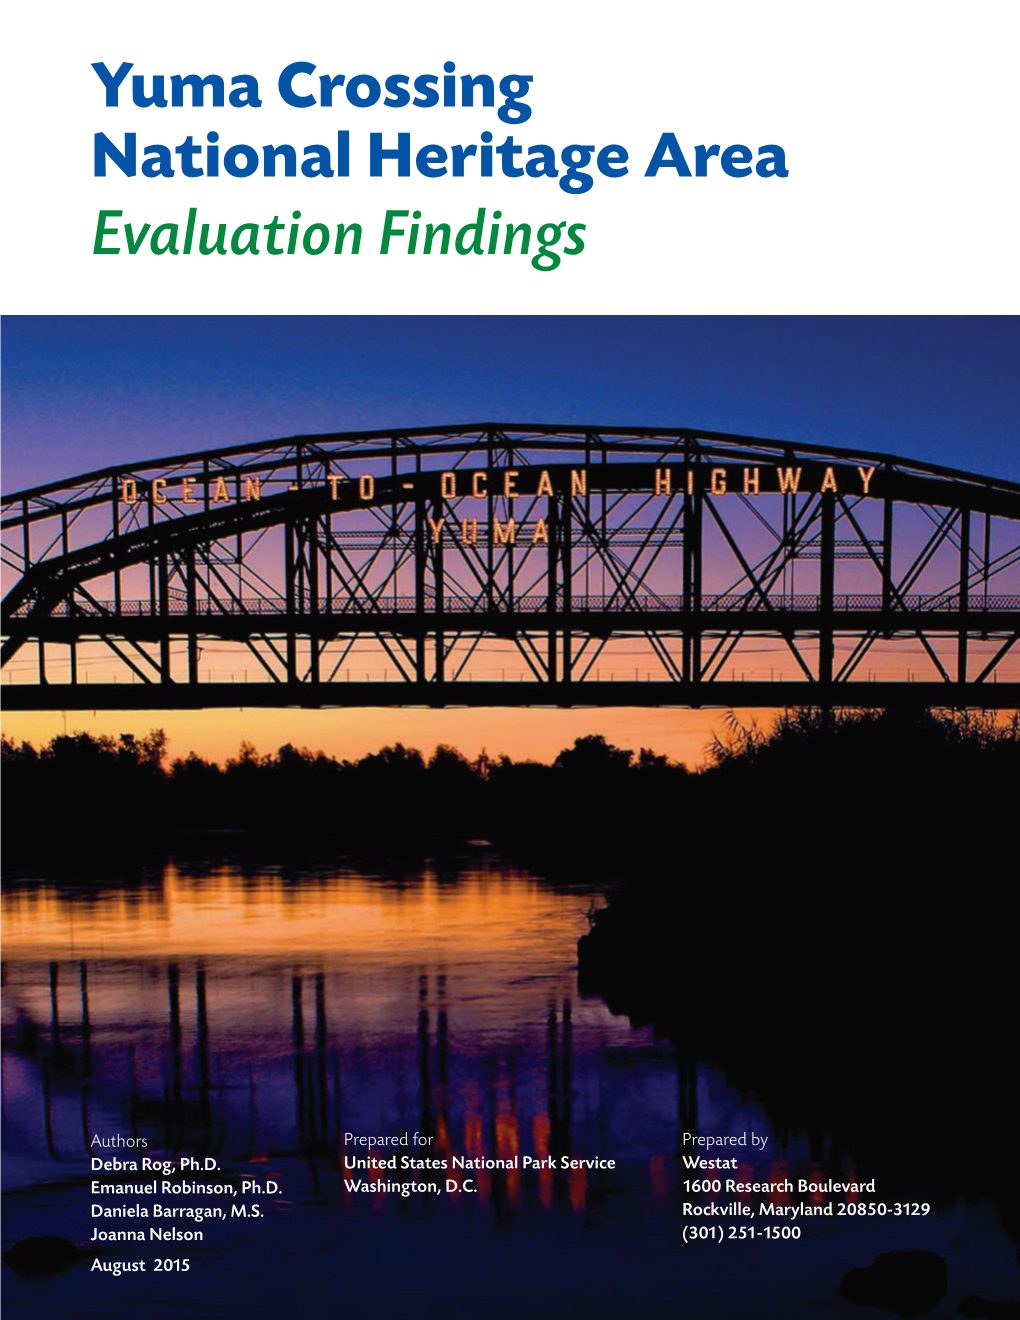 Yuma Crossing National Heritage Area Evaluation Findings